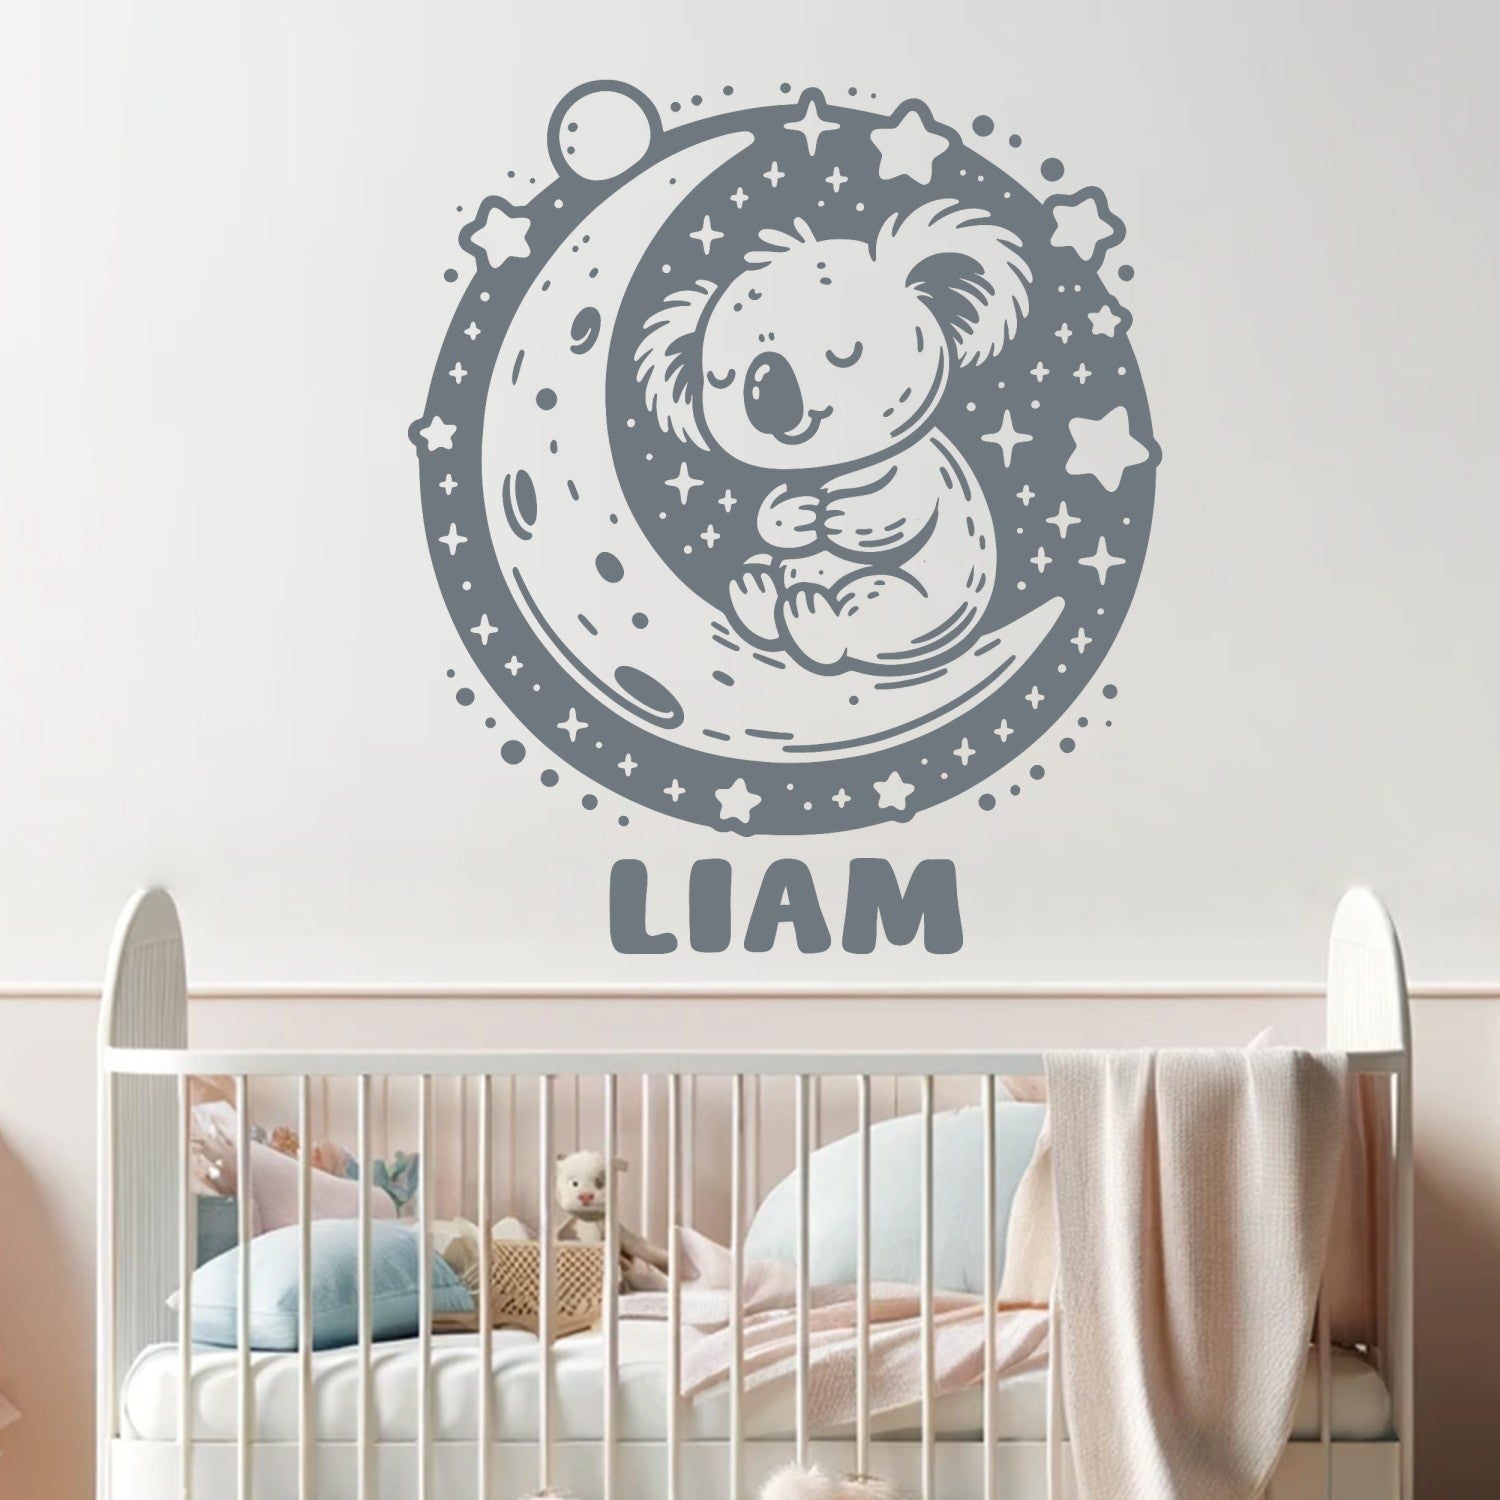 Jungle Animal Wall Decals - Koala Bear Wall Decal - Animal Wall Decals - Animal Wall Decals for Nursery - Personalized Name Stickers for Baby Room Design 01